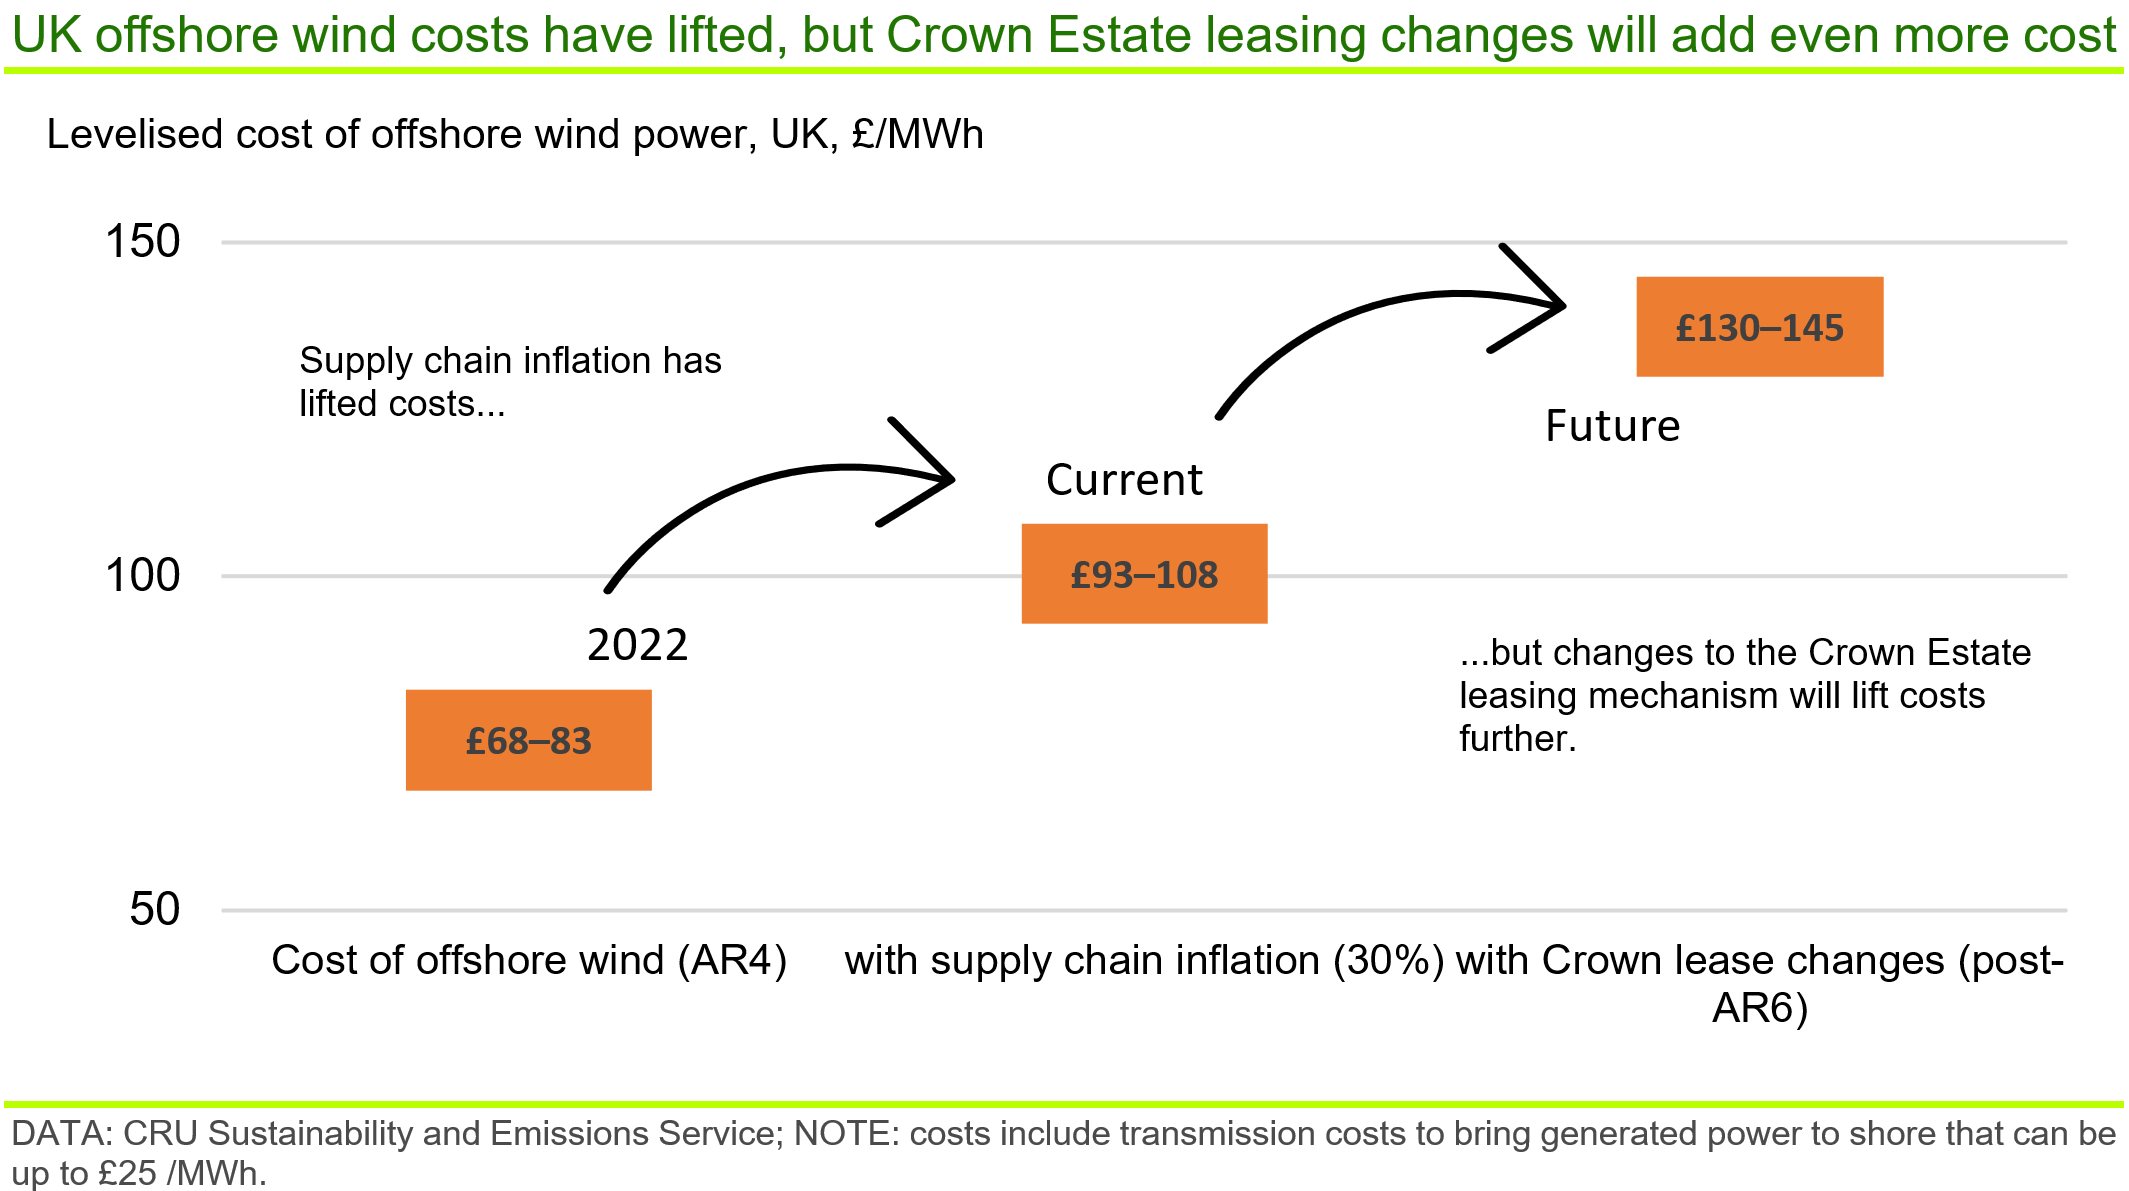 Graph showing that UK offshore wind costs have lifted